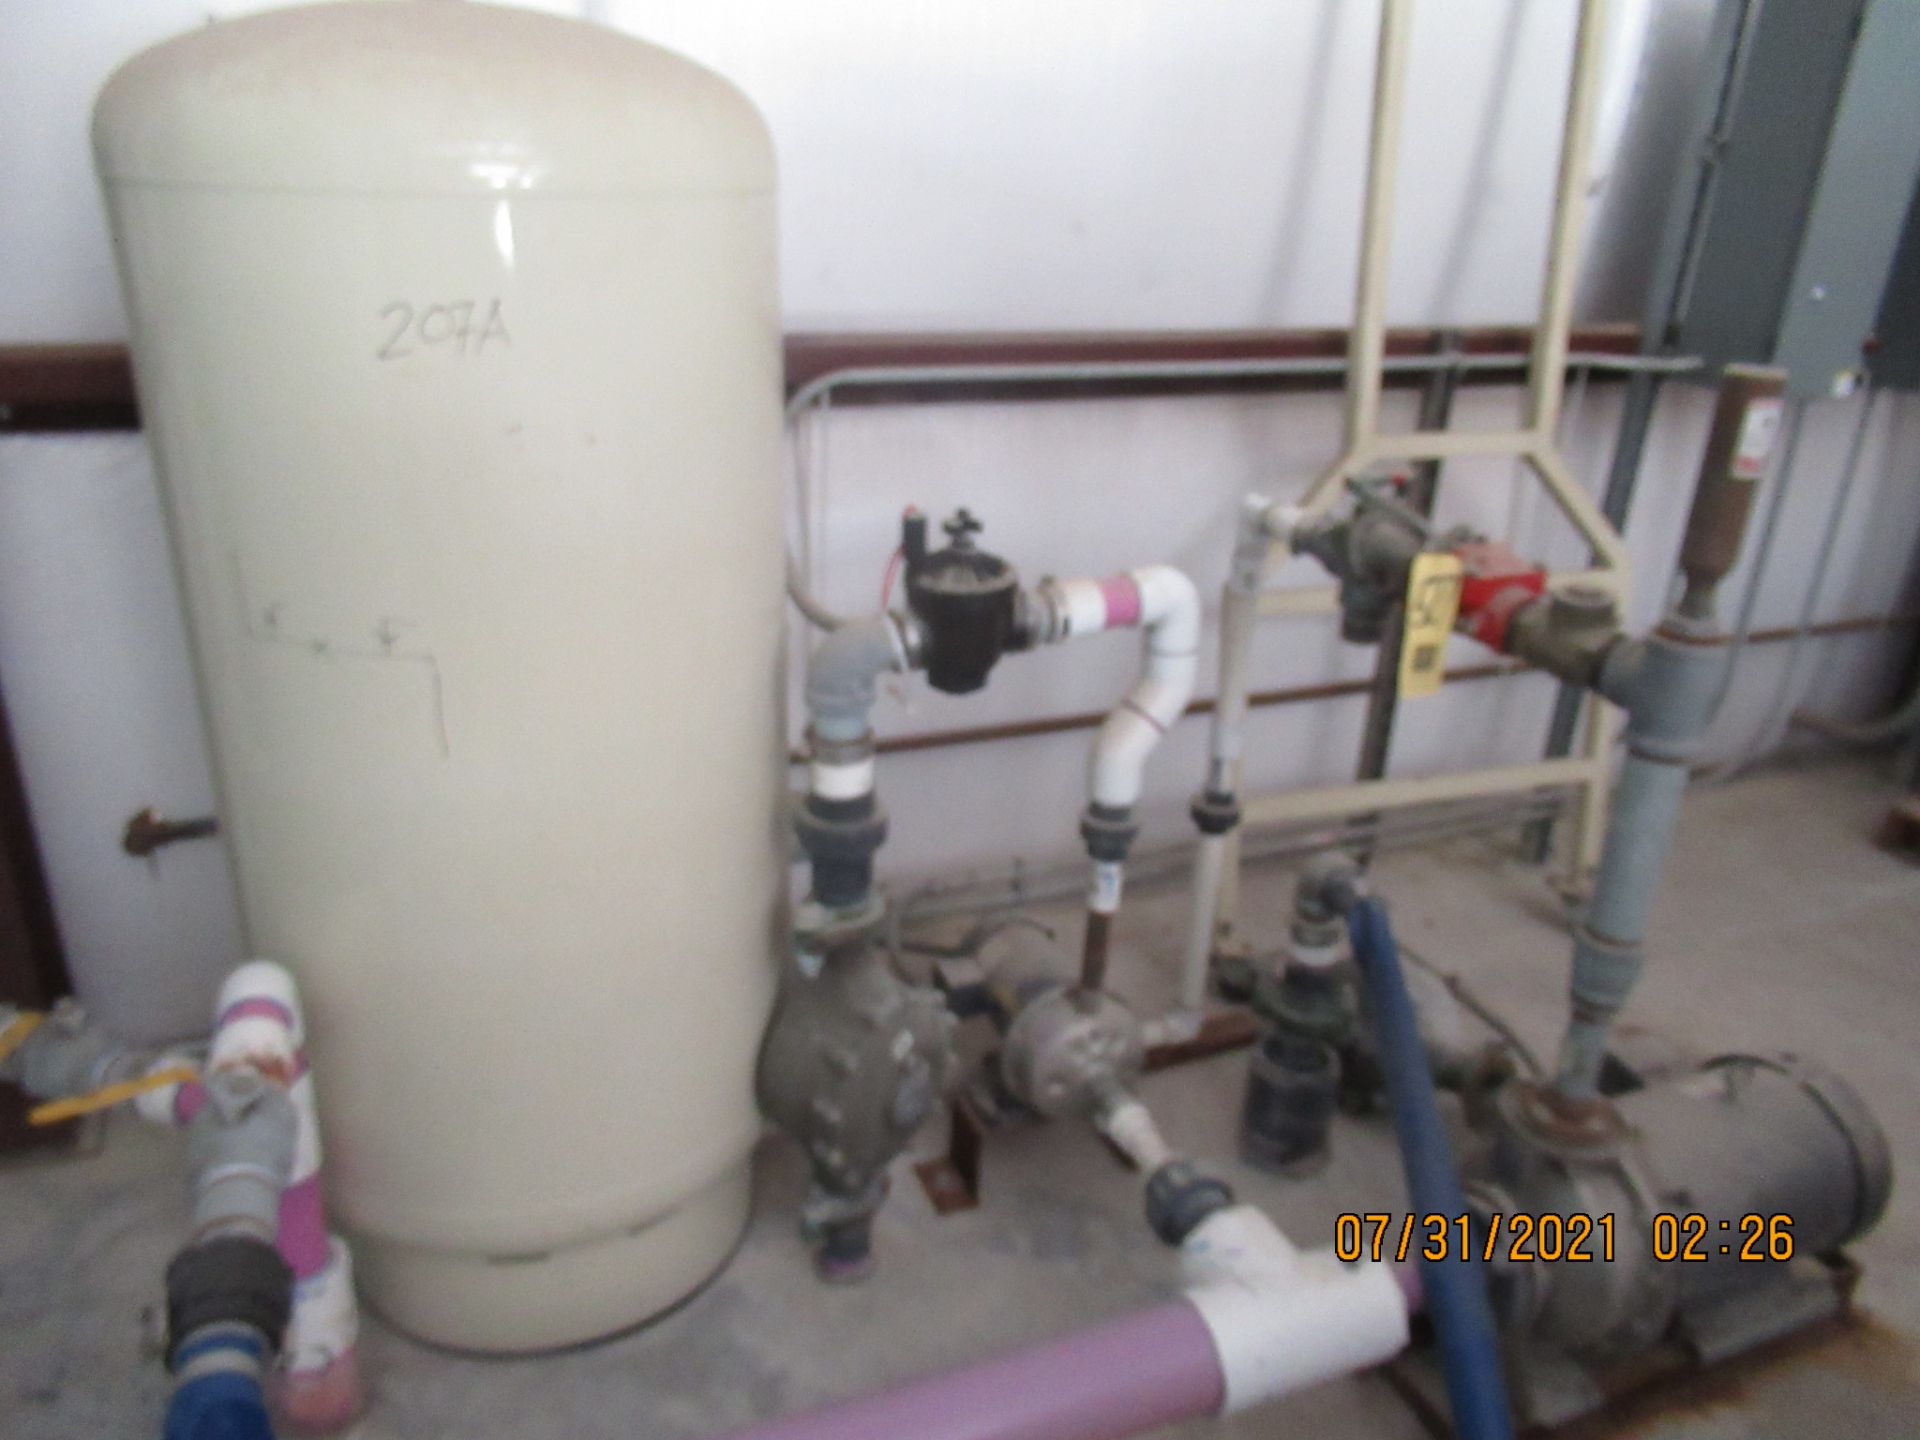 Gray Water System - Image 2 of 3